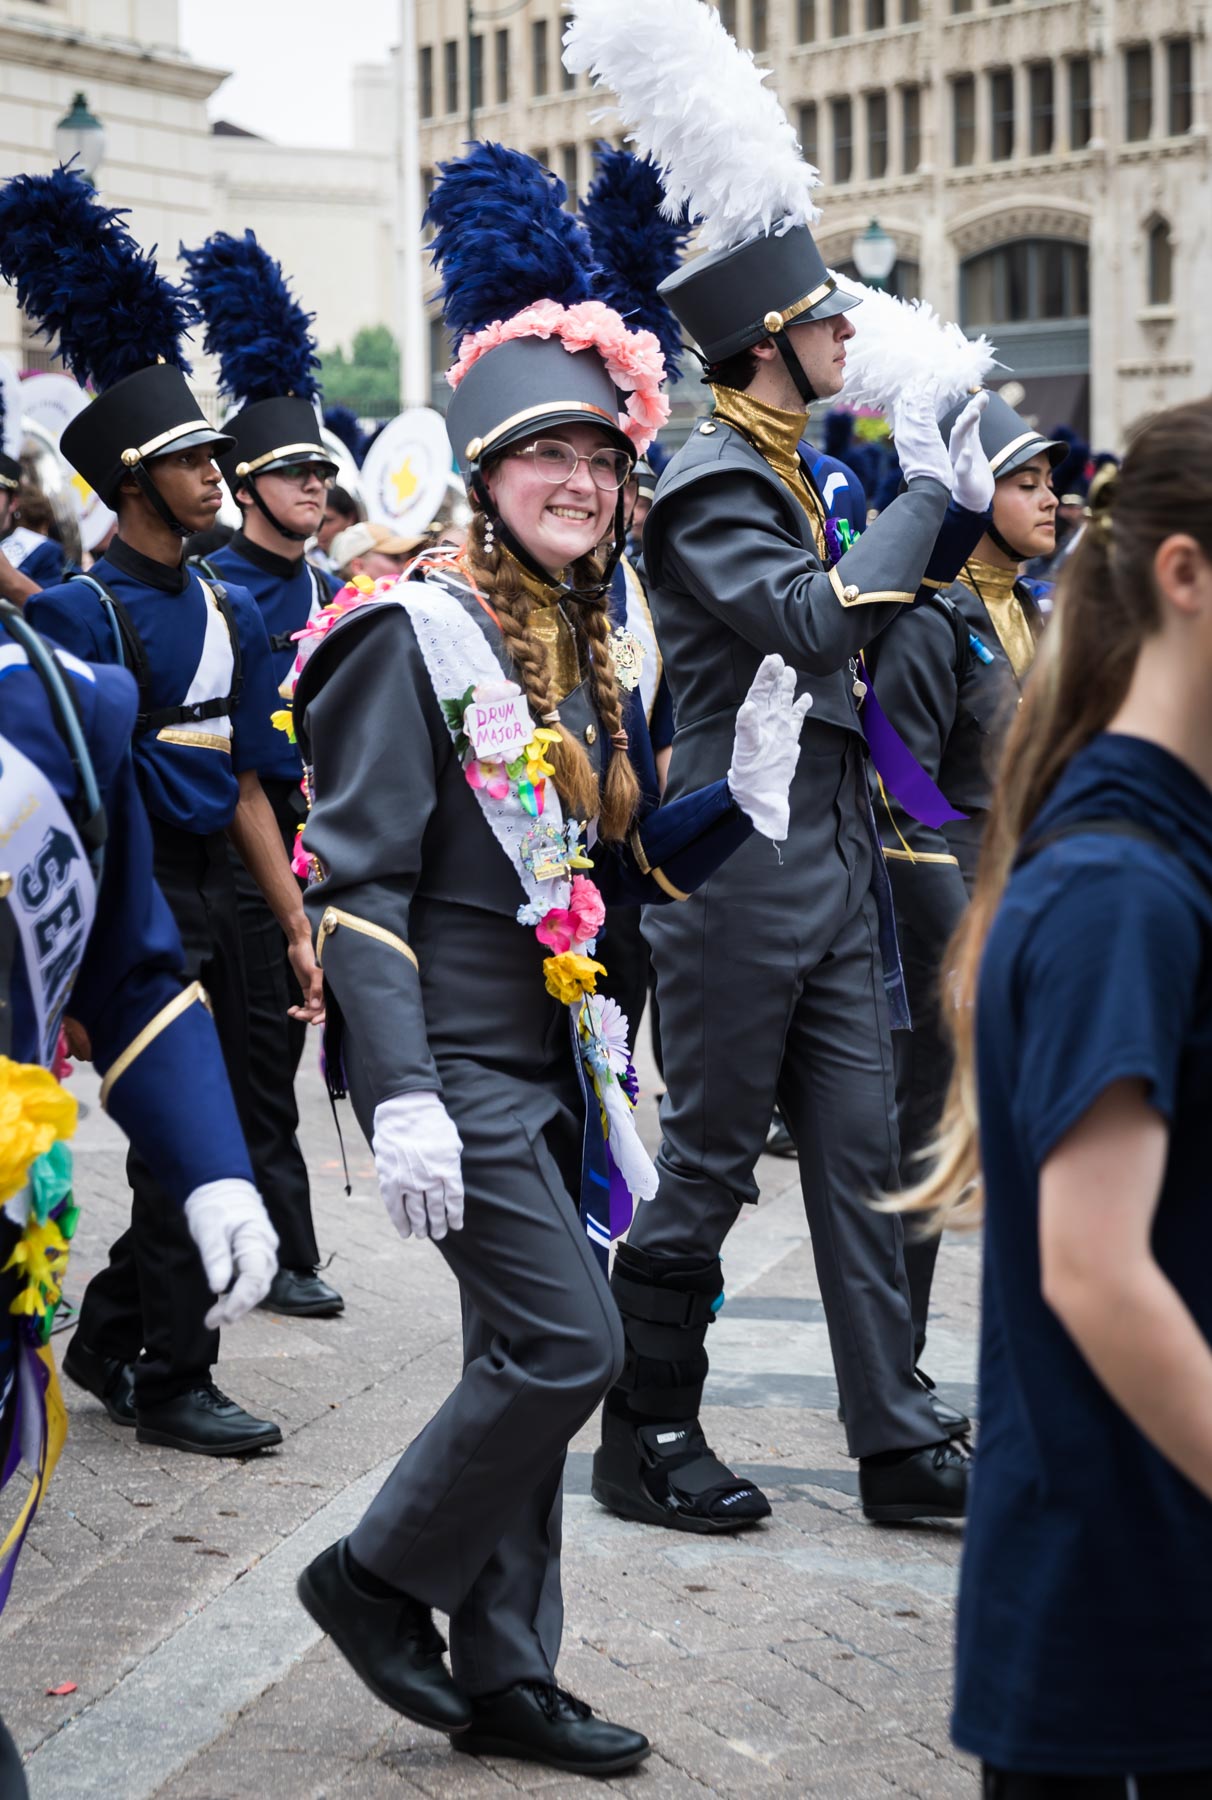 Young female band member waving and wearing colorful sash during Battle of Flowers Parade for an article on the Fiesta photo tips